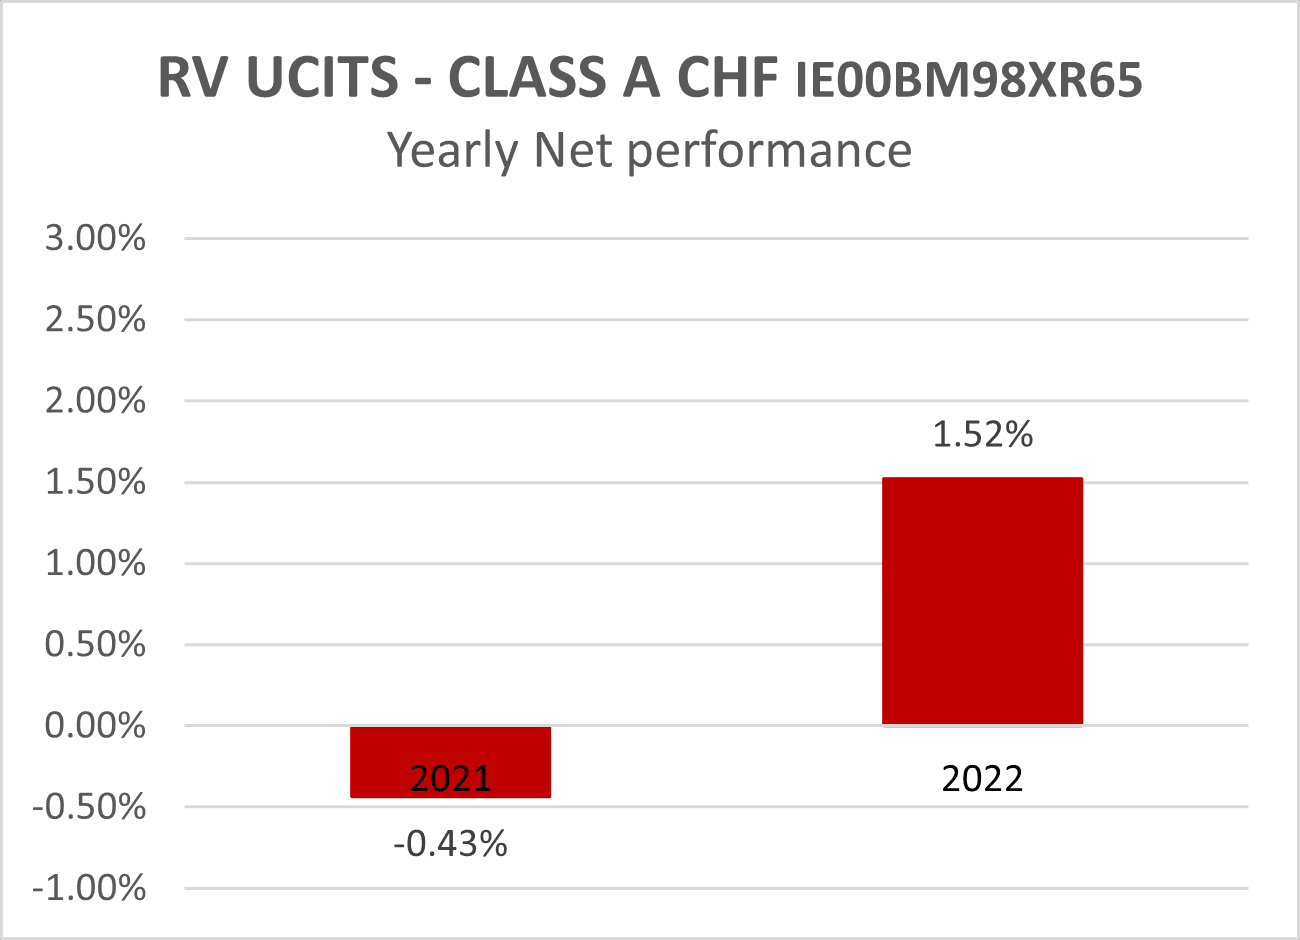 RV UCITS - CLASS A CHF IE00BM98XR65 - Yearly Net performance